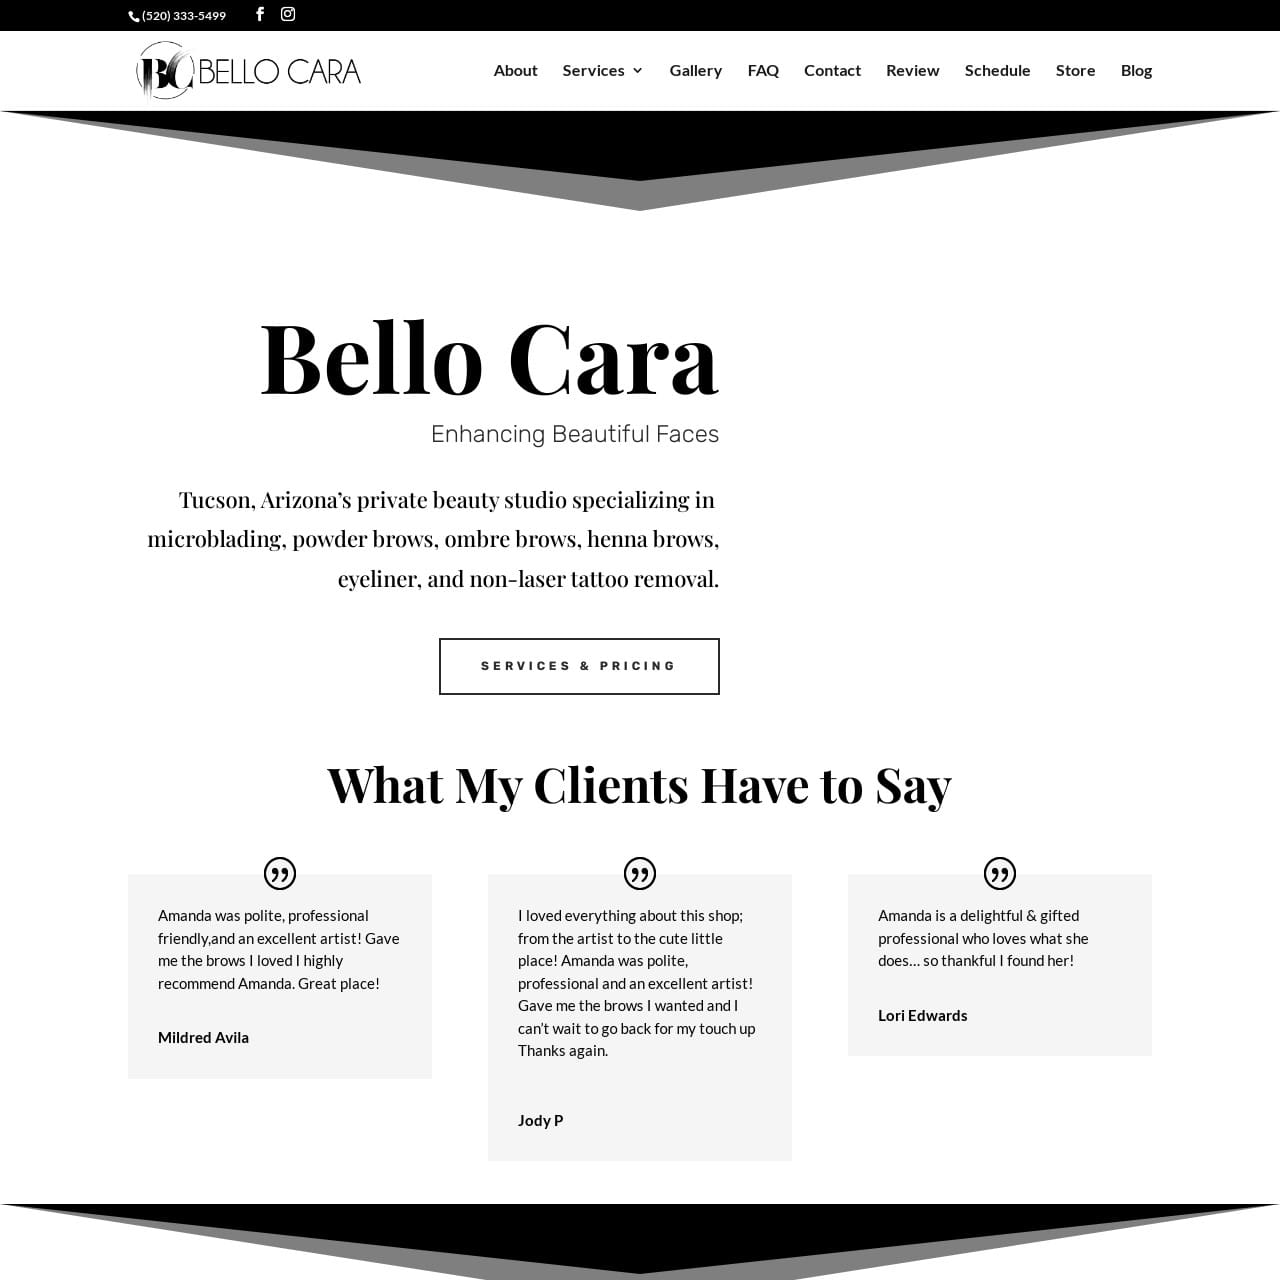 Bello Cara Portfolio: Witness the transformative website rebuild by Shield Bar Marketing, introducing a fresh design that revitalizes their online presence and empowers effective communication through expertly crafted email marketing campaigns.